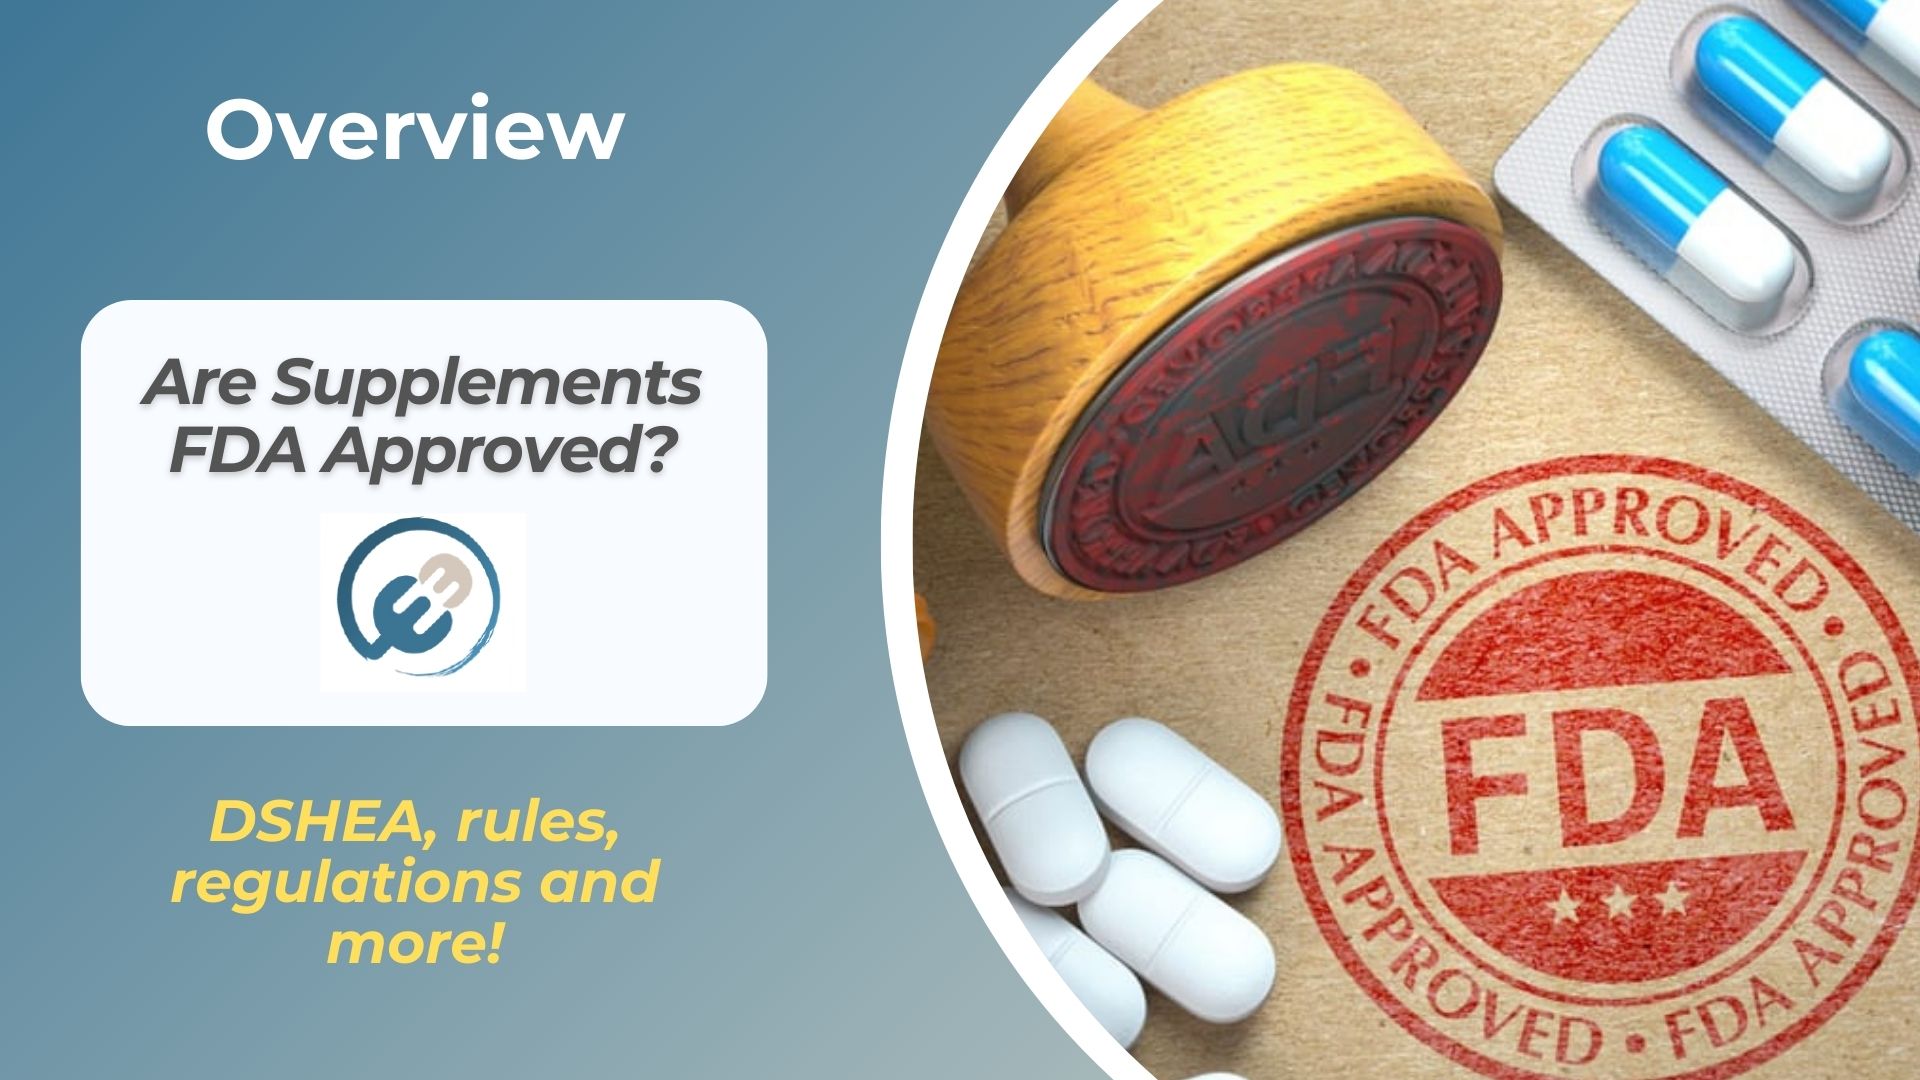 Are Supplements FDA Approved?